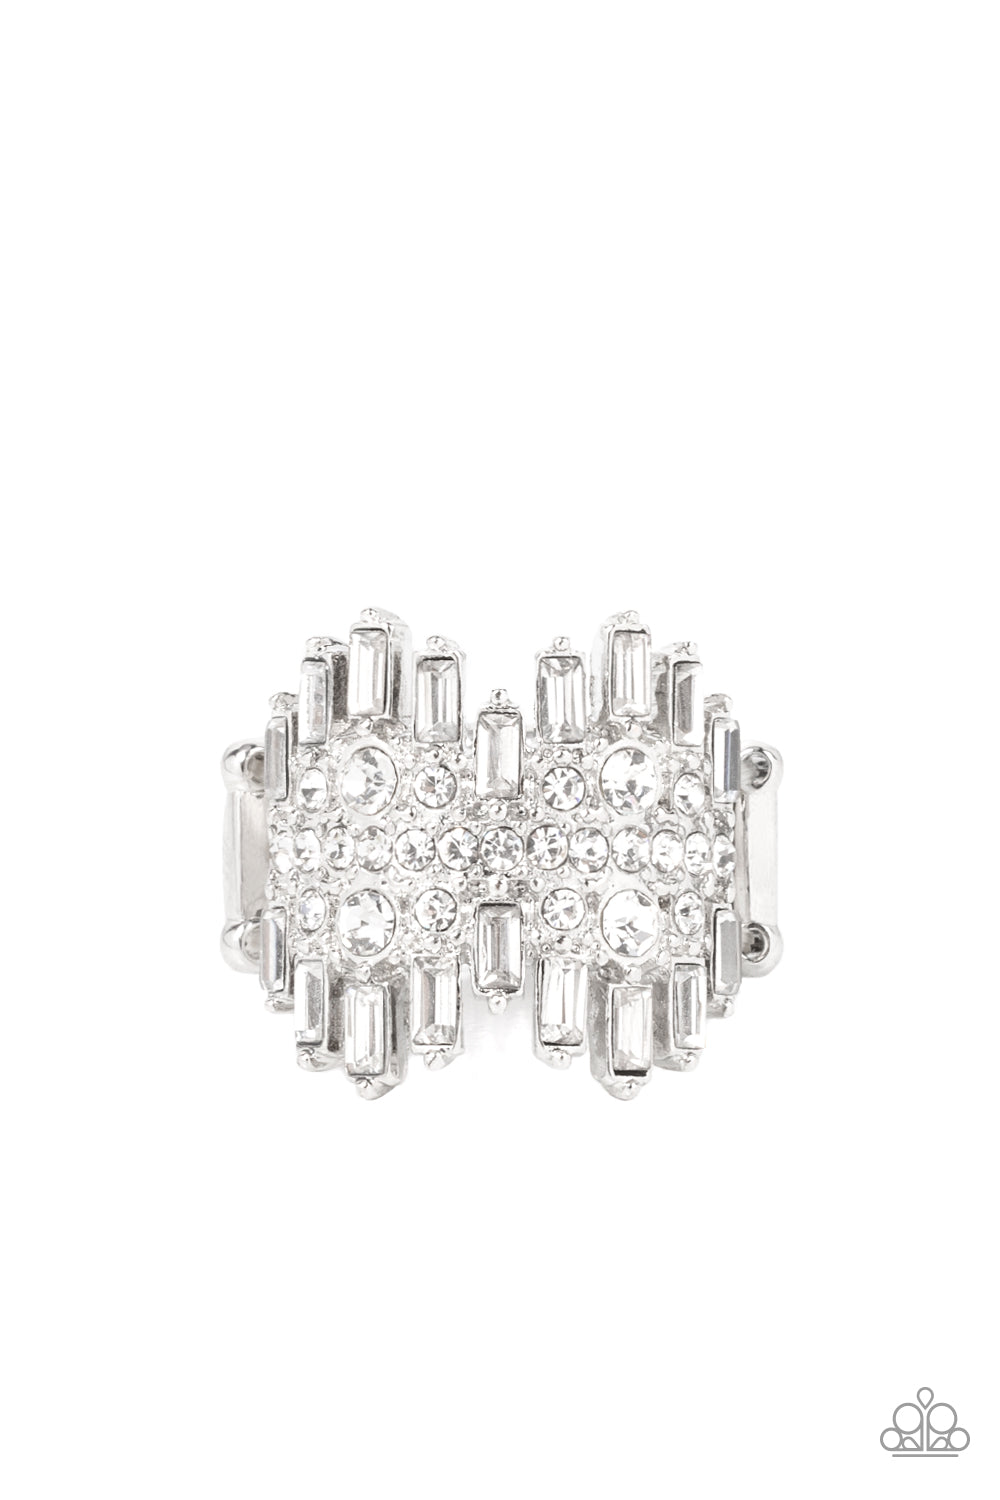 Staggered rows of emerald cut rhinestones flare out from the top and bottom of an explosion of classic white rhinestones